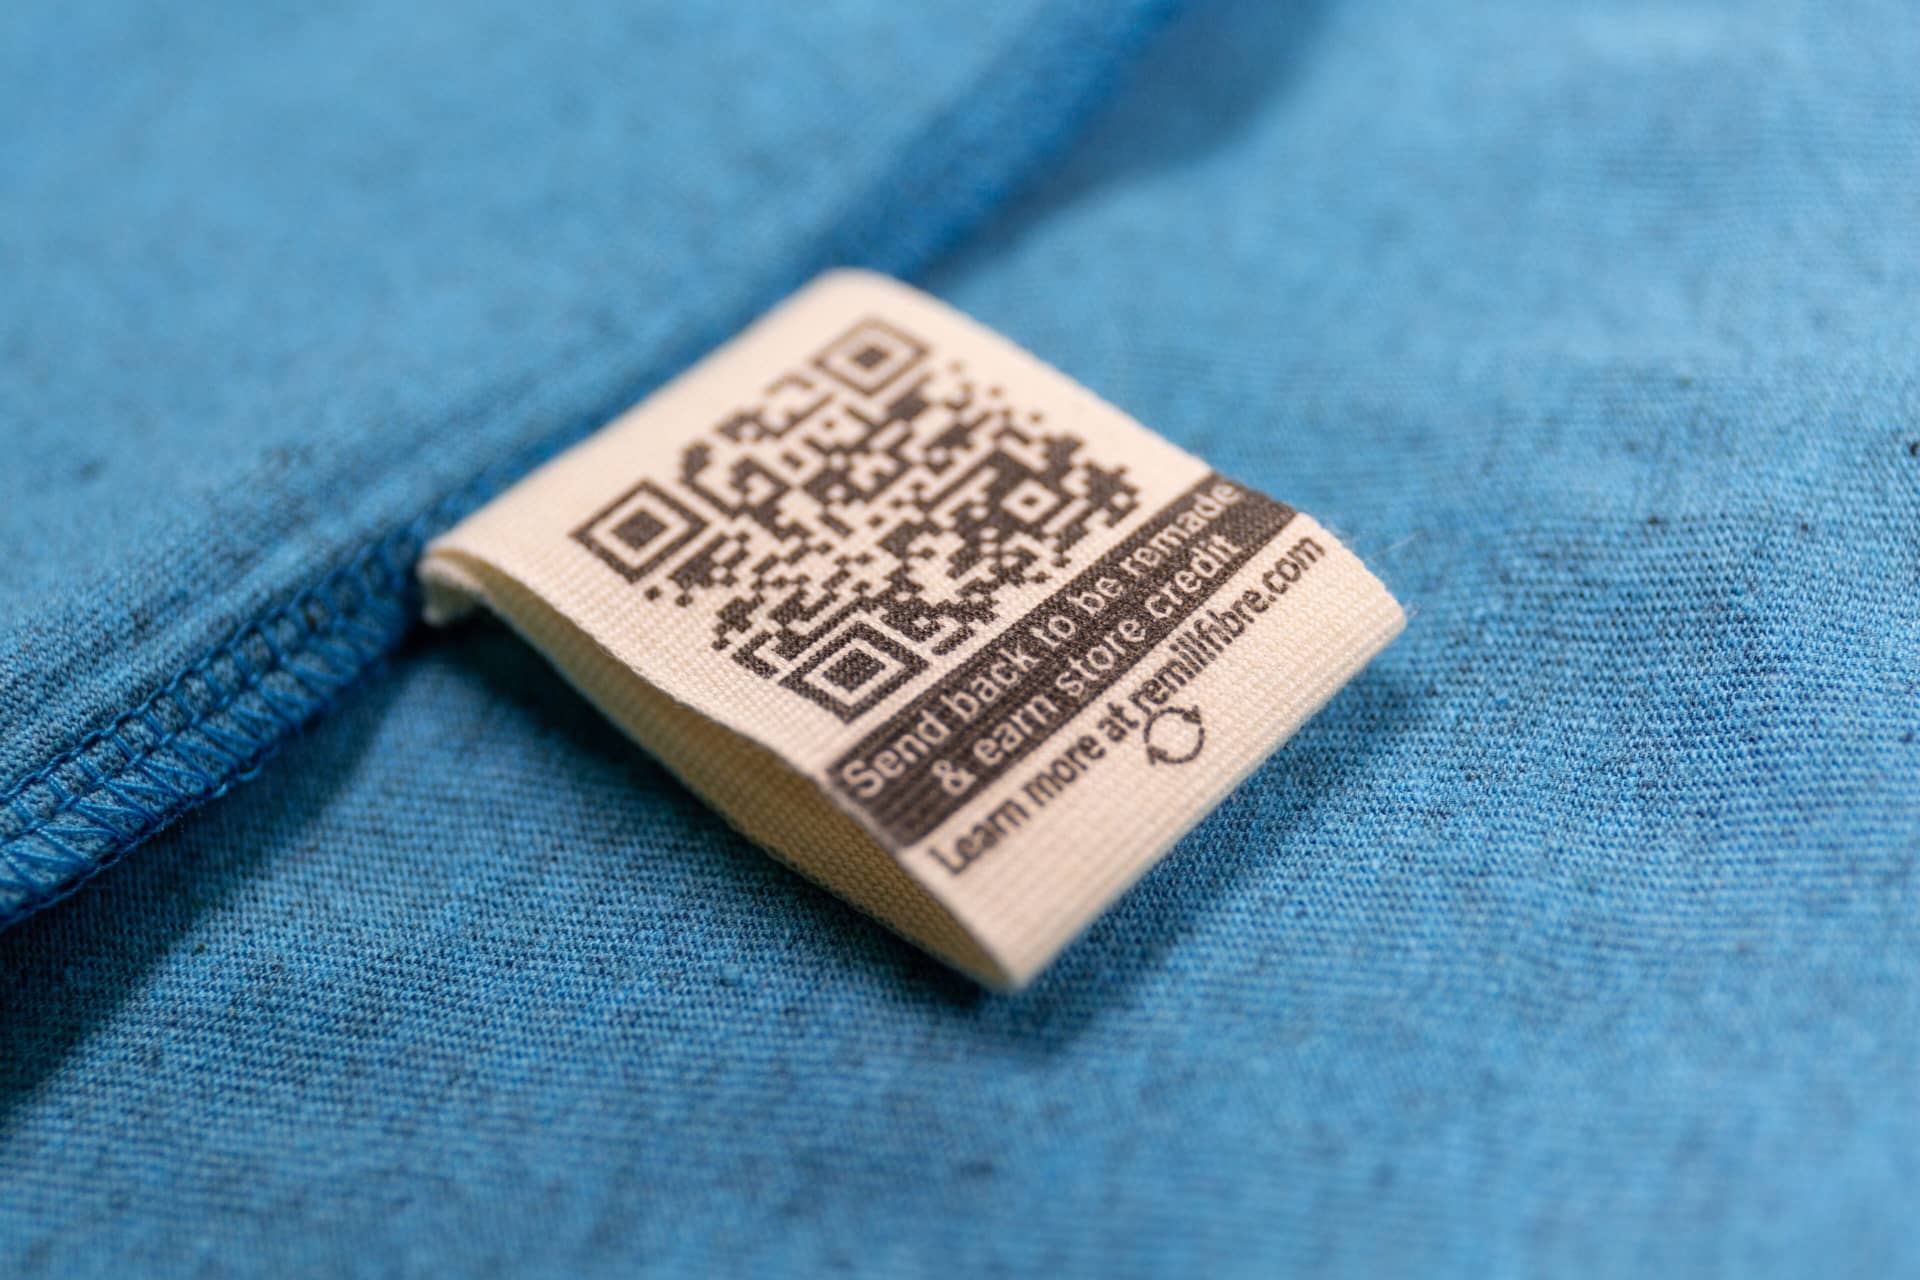 T-shirt label with instructions to send back for reuse - part of Teemill's Take Back Friday campaign